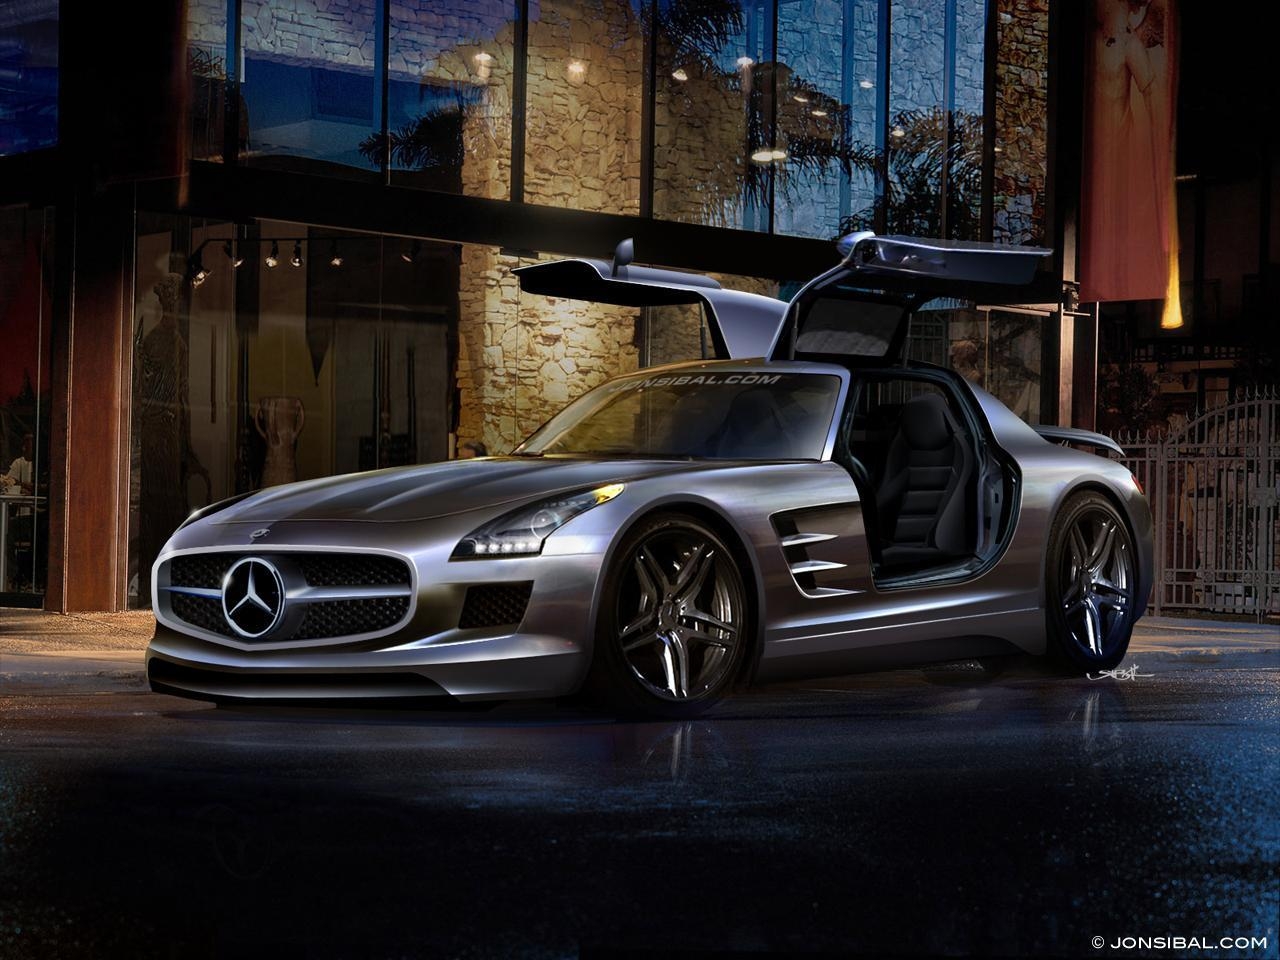 HD Background And Wallpaper Of Mercedes Benz For